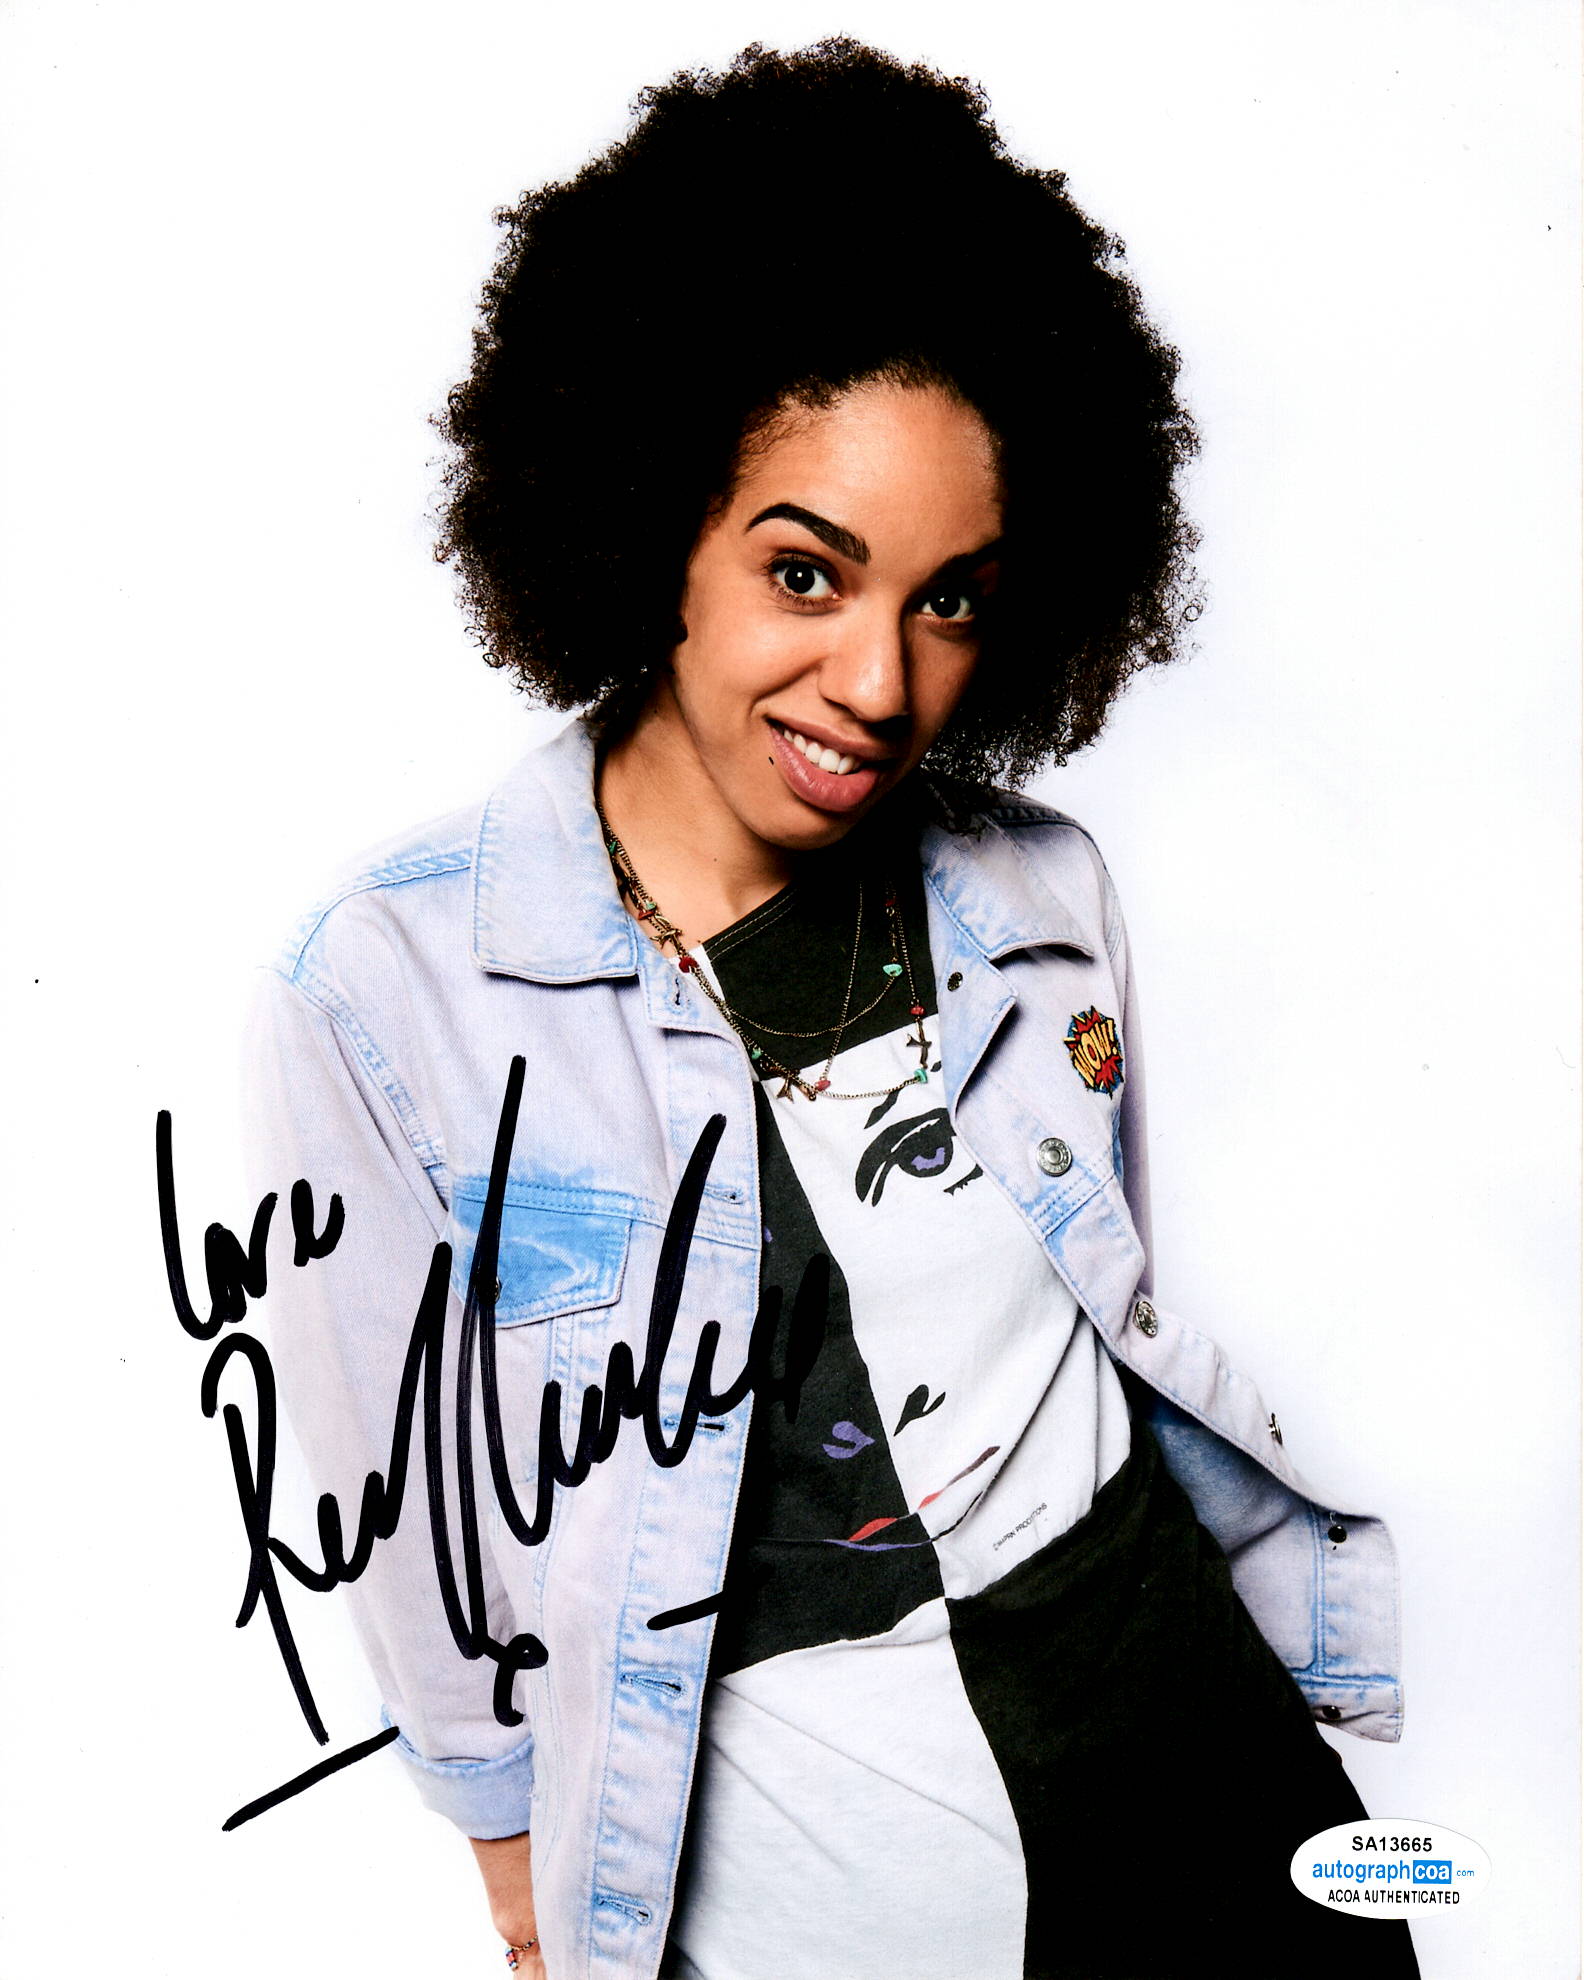 Pearl Mackie Doctor Who Signed Autograph 8x10 Photo #5 - Outlaw Hobbies Authentic Autographs